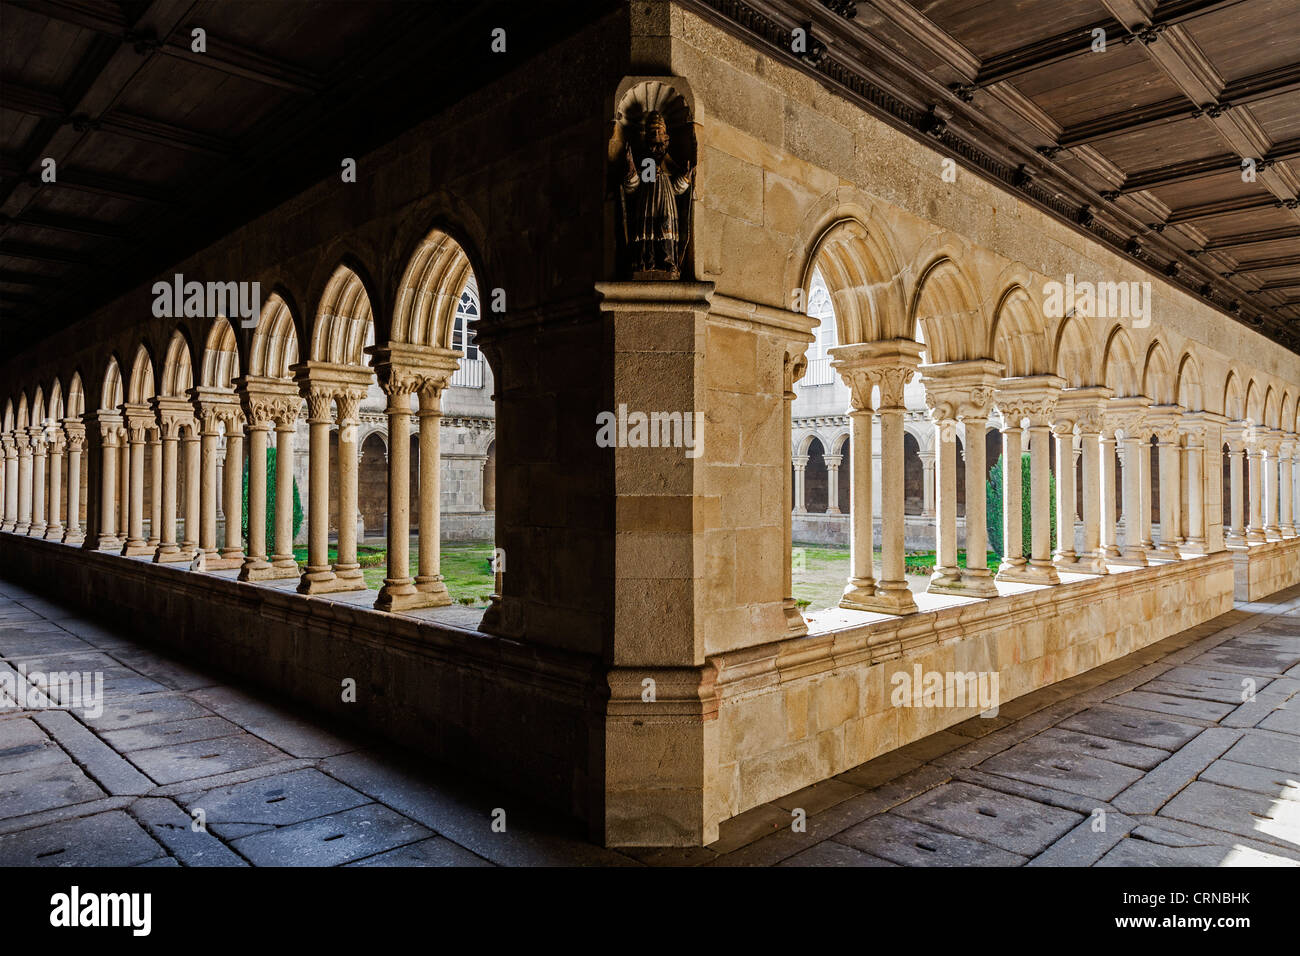 S. Bento monastery in Santo Tirso, Portugal. Benedictine order. Built in the Gothic (cloister) and Baroque (church) style. Stock Photo